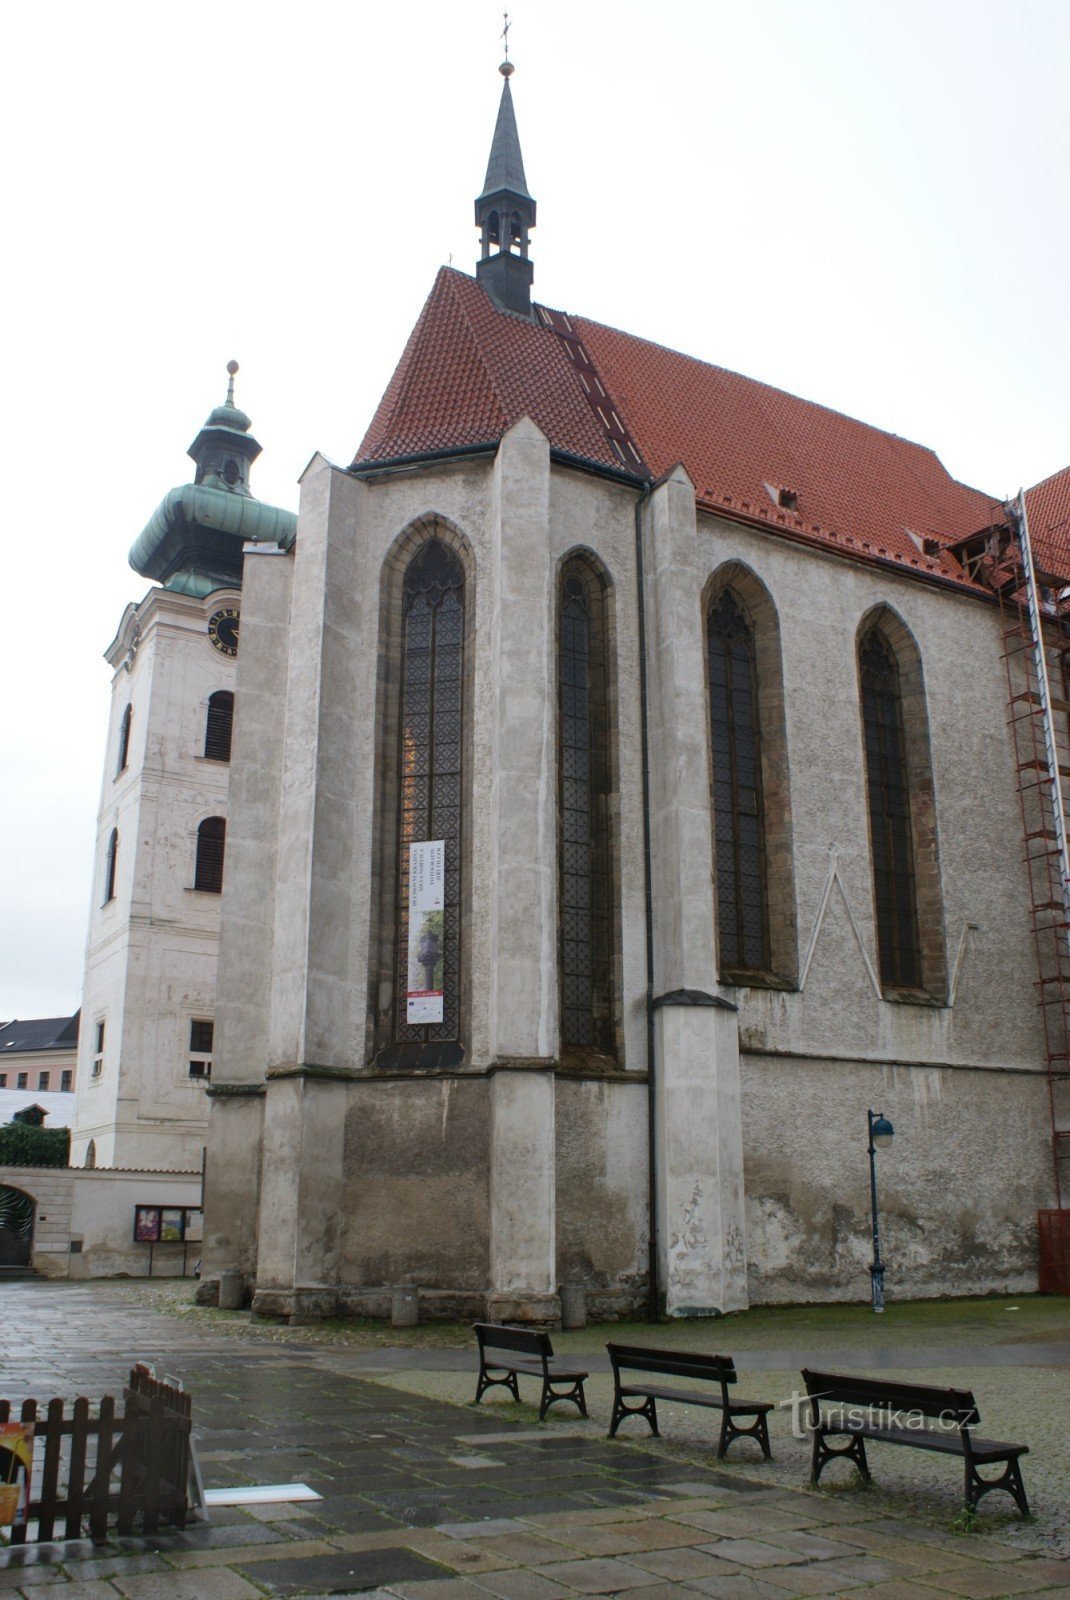 Bell tower and choir of the monastery church